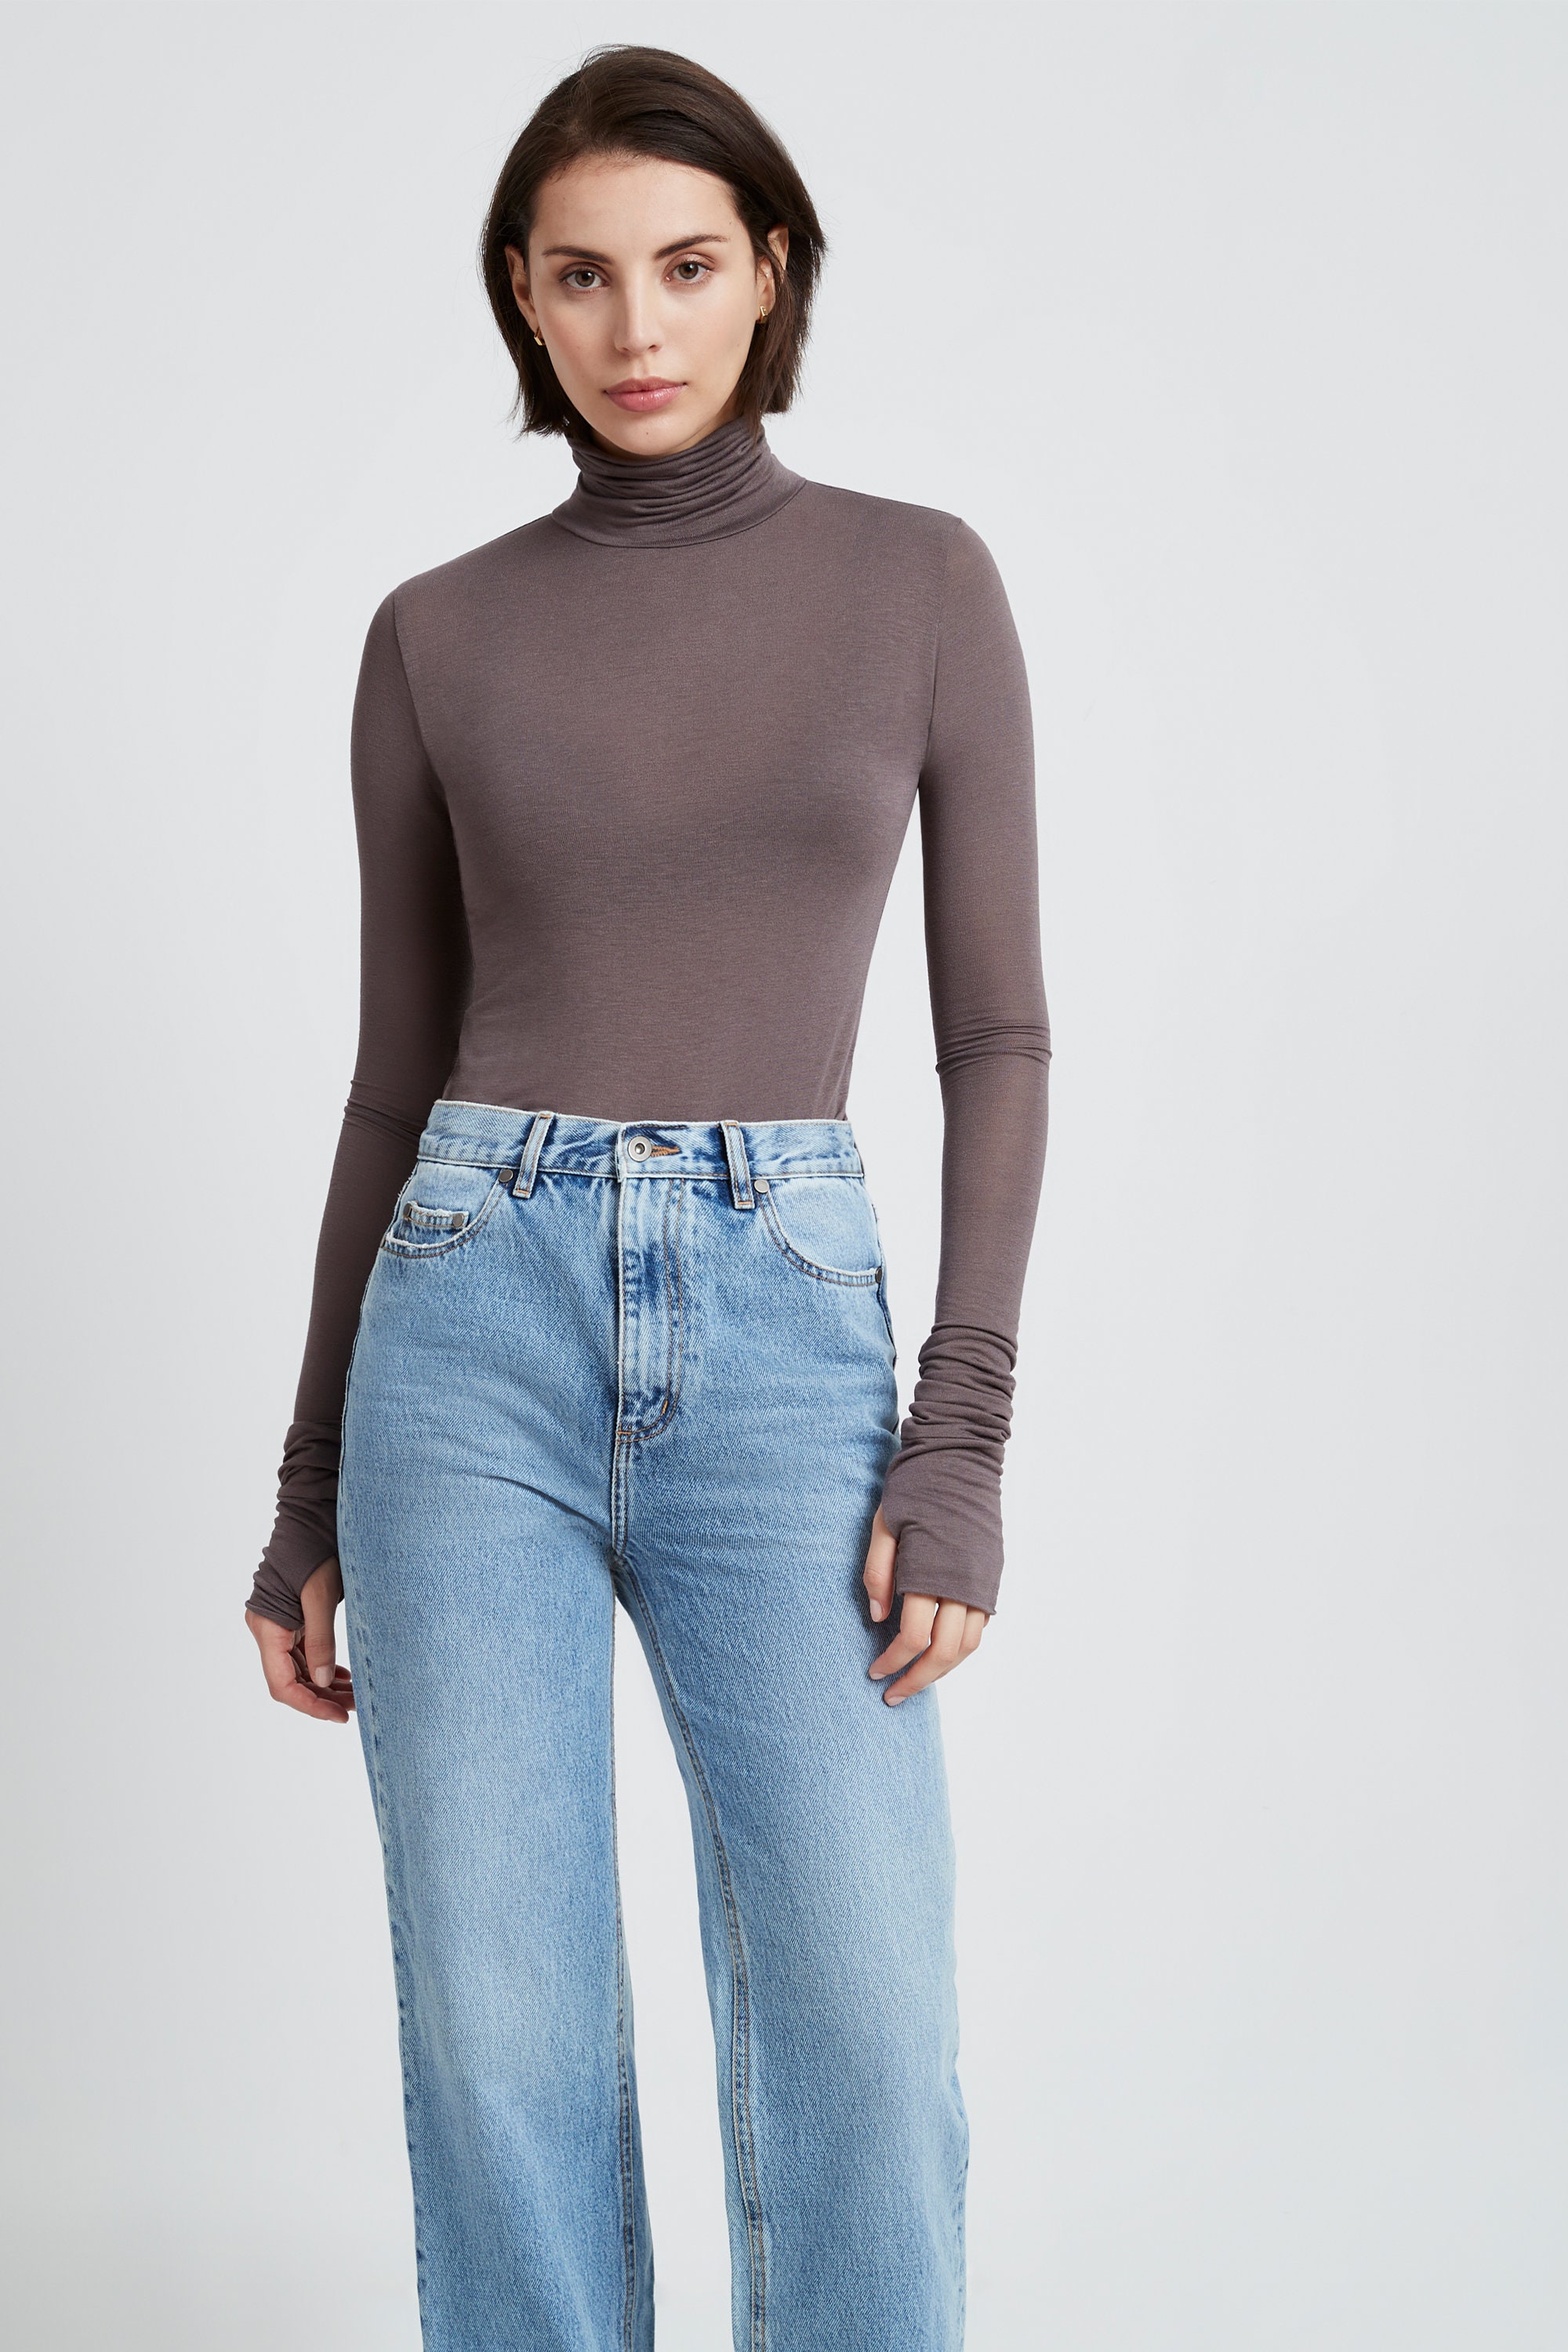 Sheer Fitted Turtleneck Top With Thumbholes, Long Sleeves, Fitted